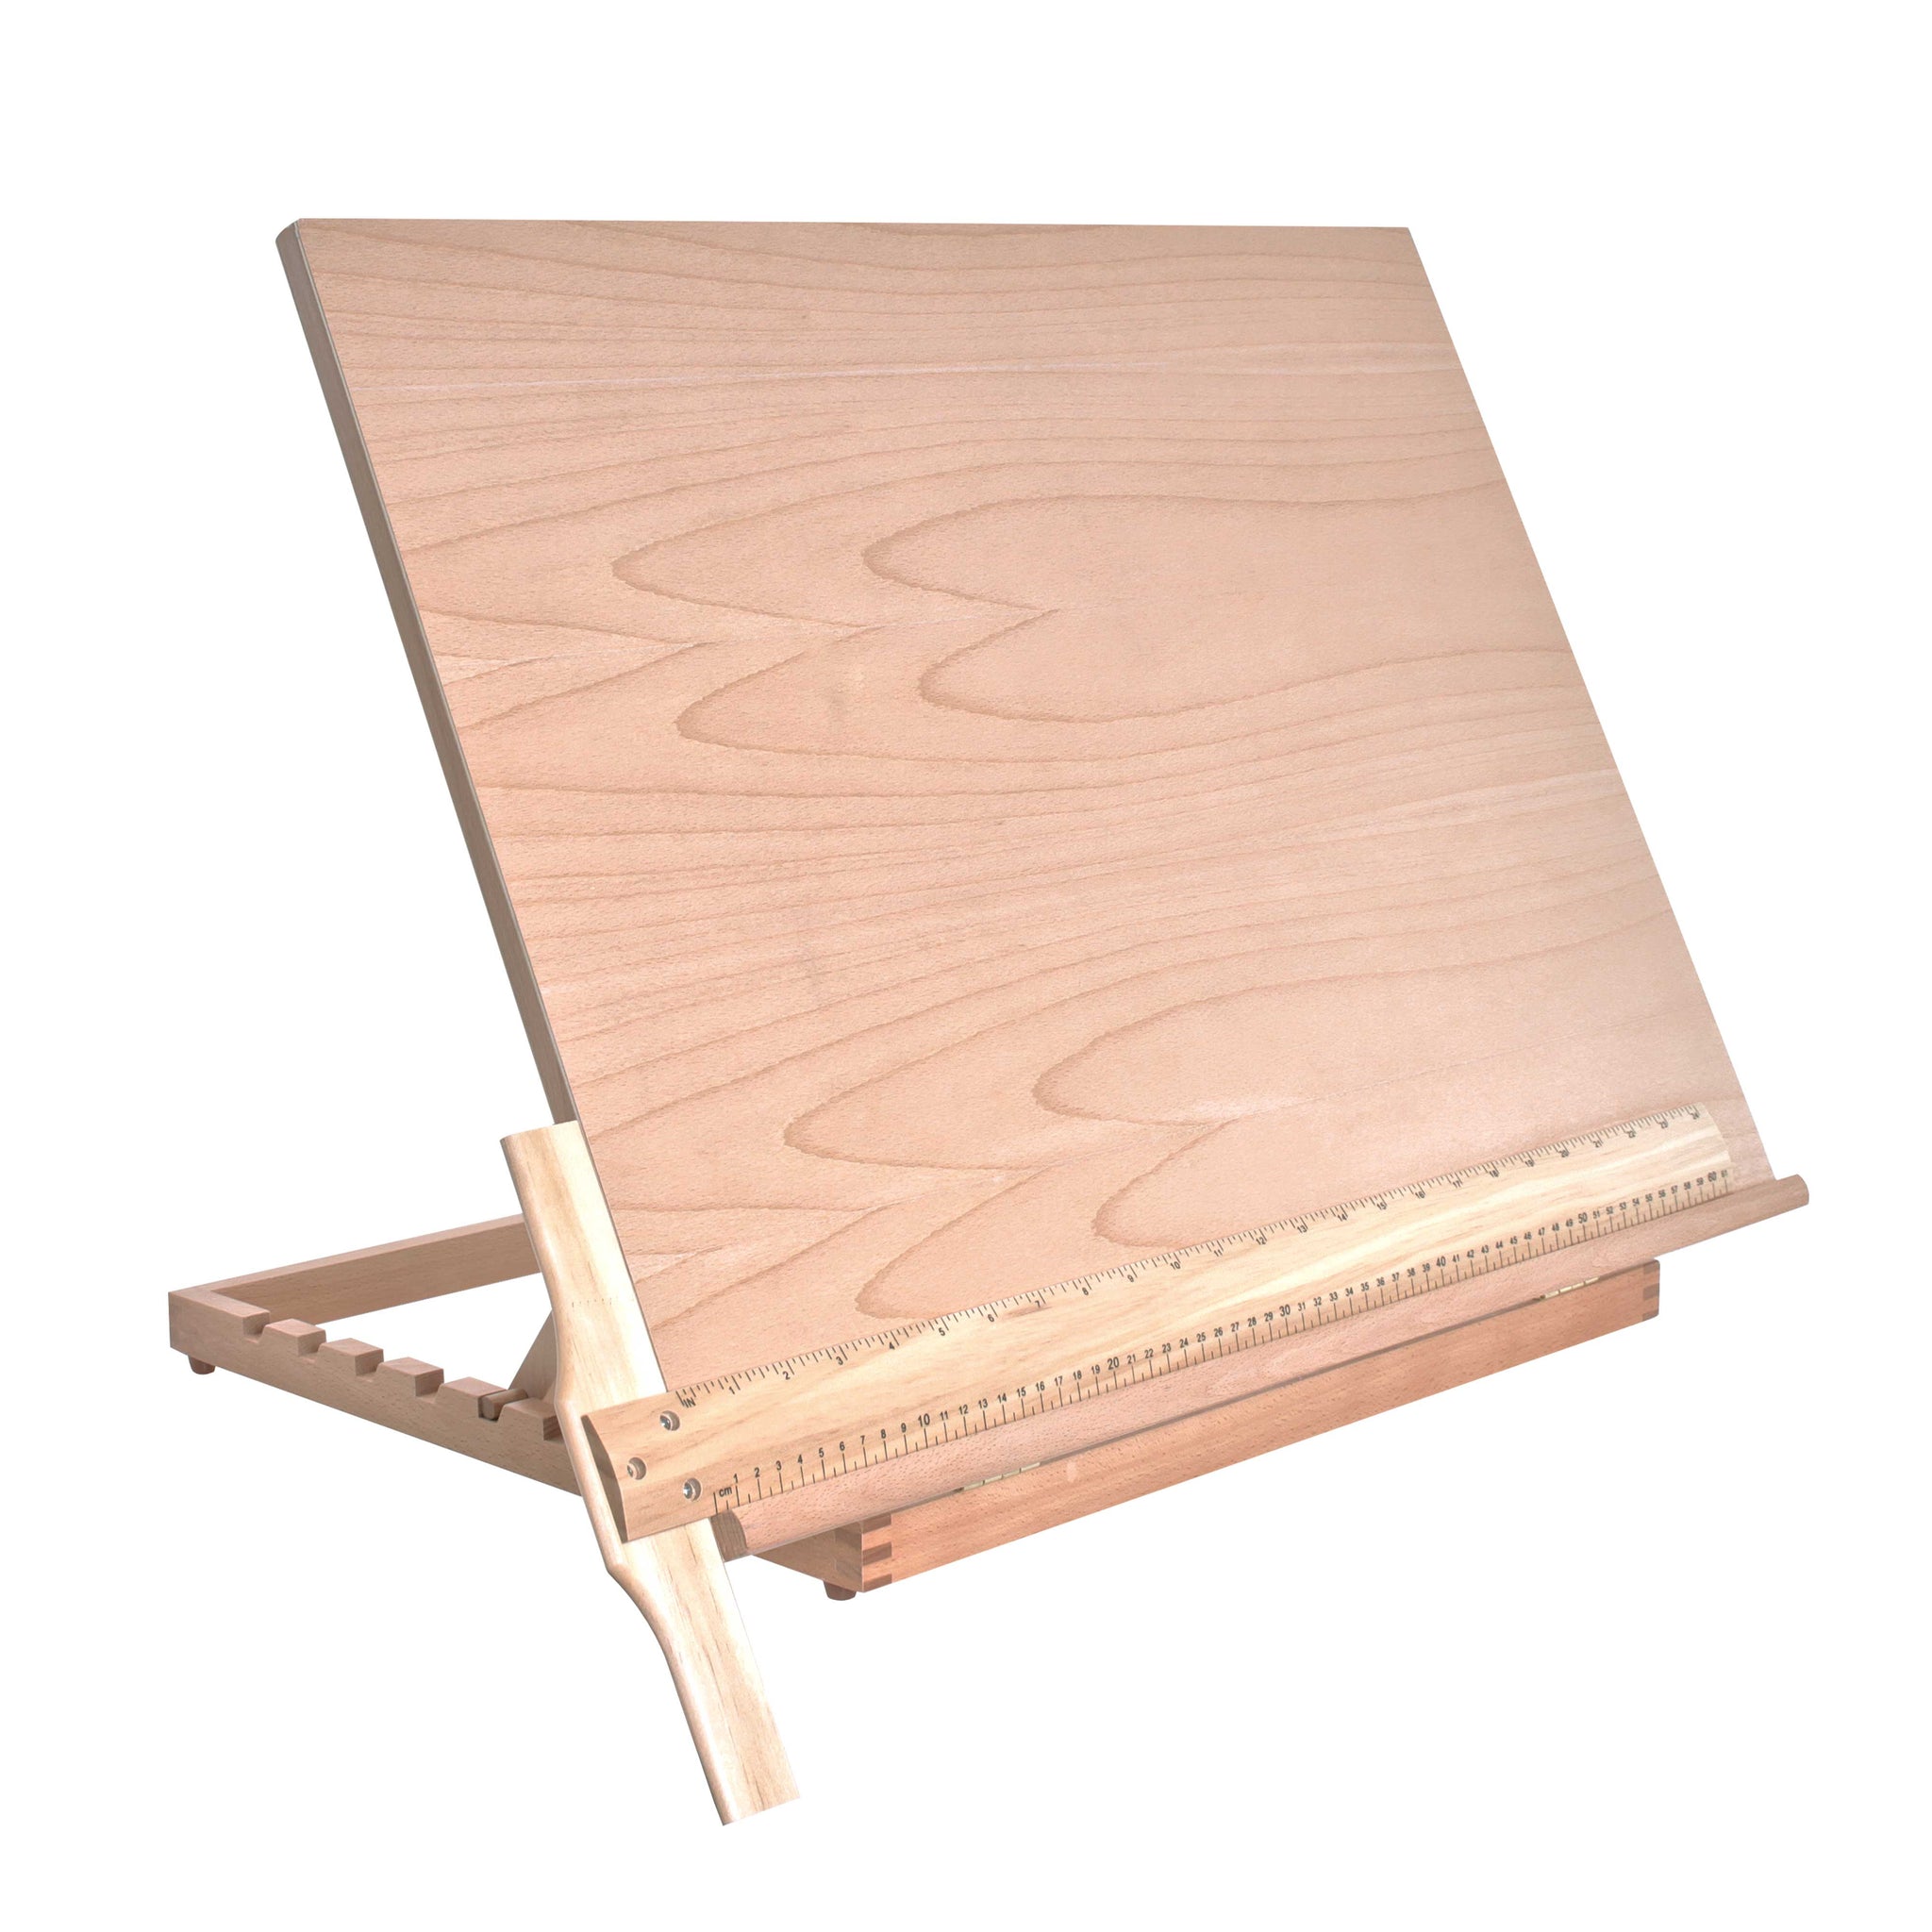 Extra Large Adjustable Wood Artist Drawing & Sketching Board 26